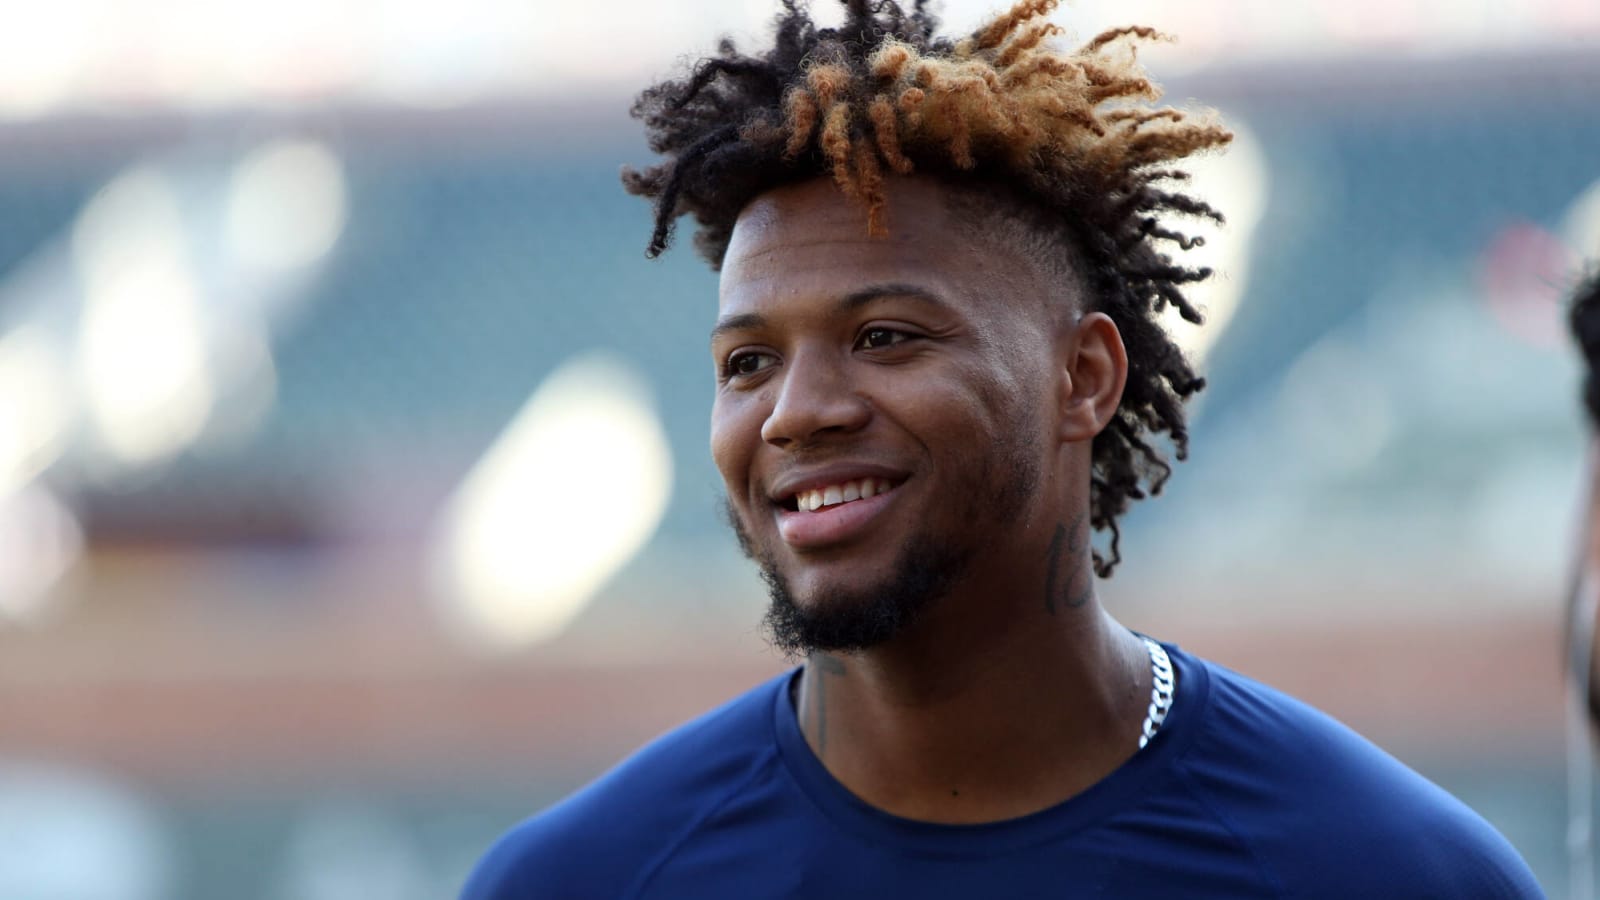 Atlanta Braves outfielder Ronald Acuña Jr. confronted by two fans